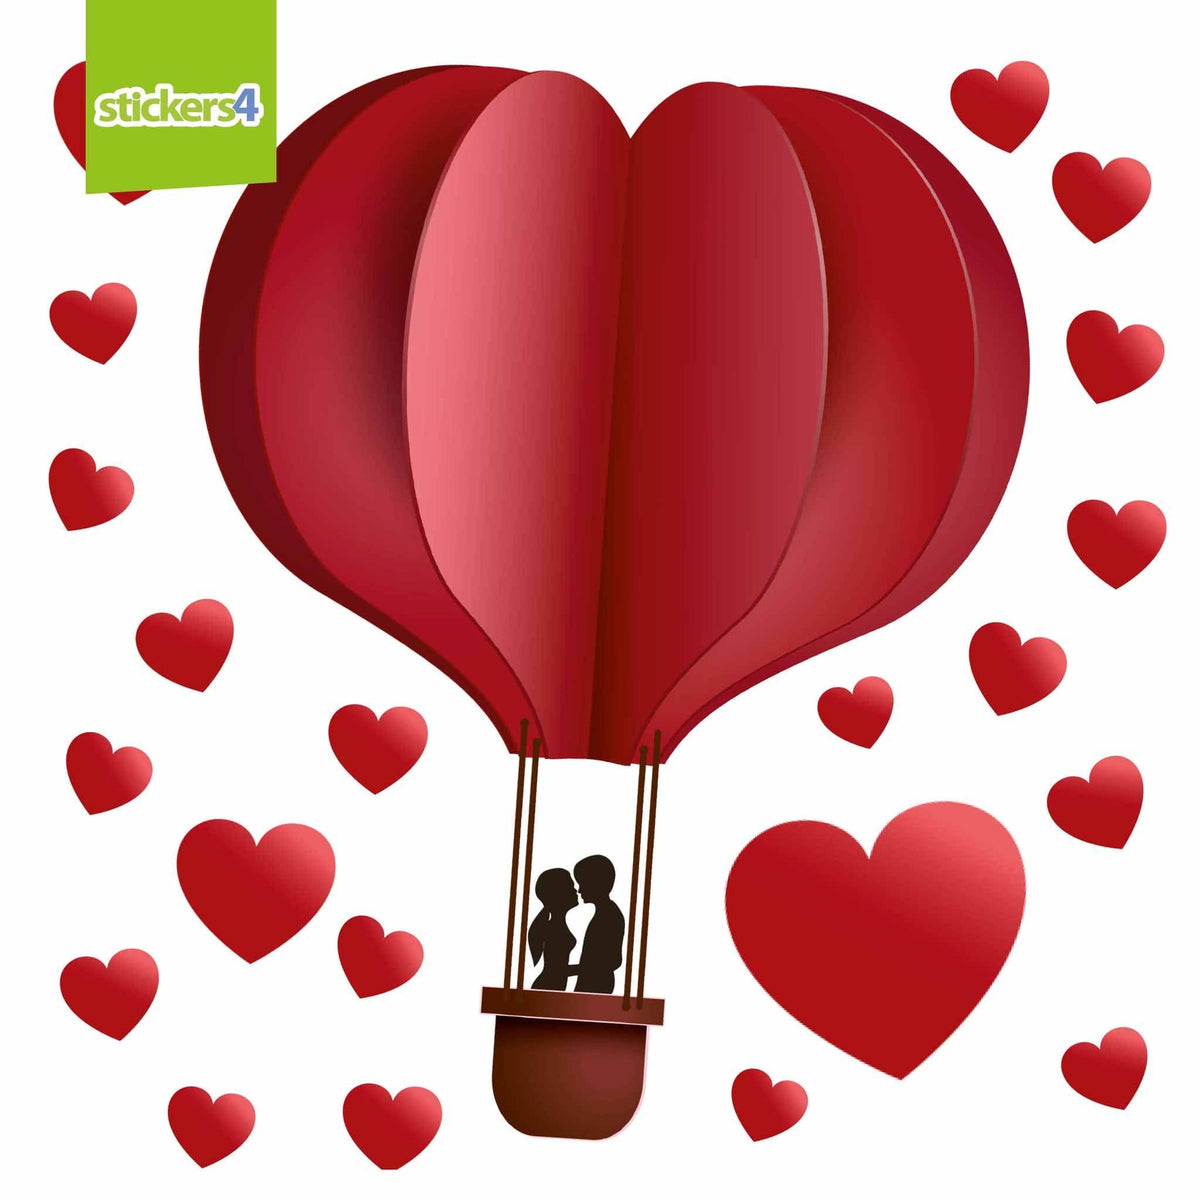 Papercut Balloon with Hearts Window Cling Sticker